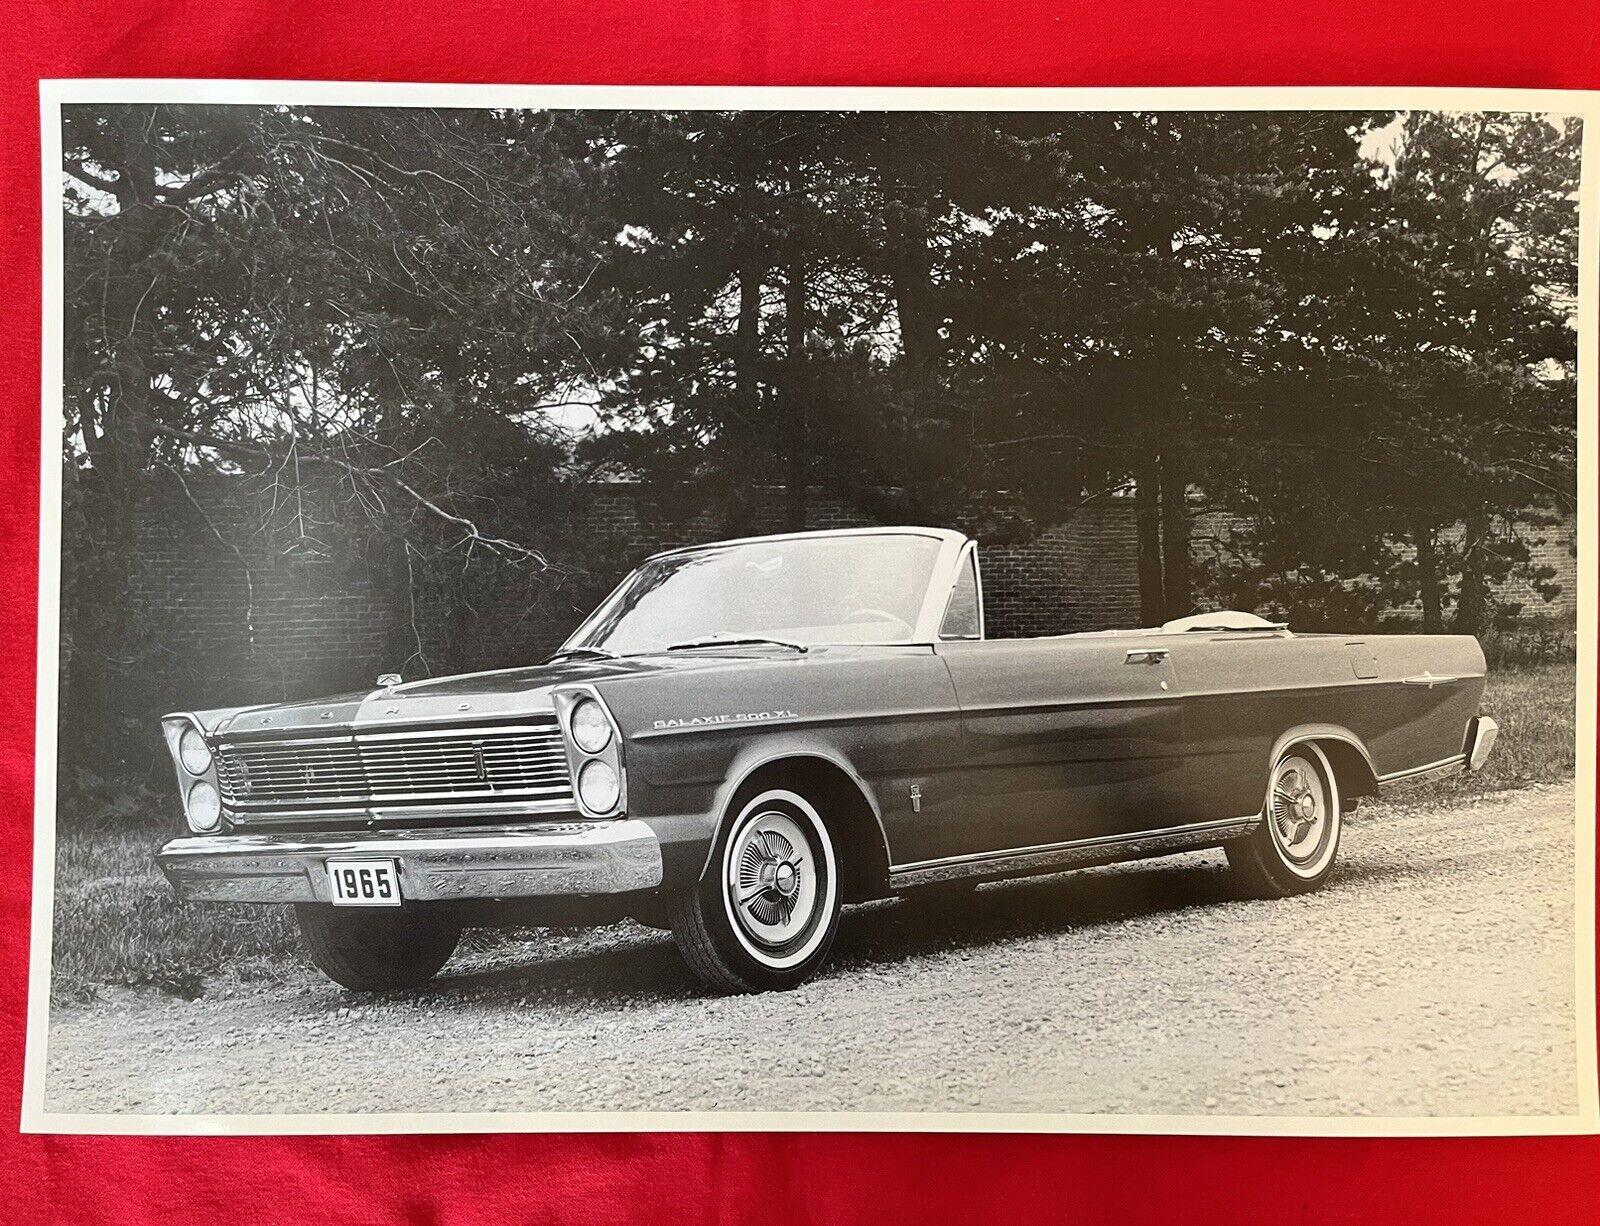 Vintage Car Picture, Big 12x18, 1965 Ford Galaxie 500 Convertible.  B/W, NOS